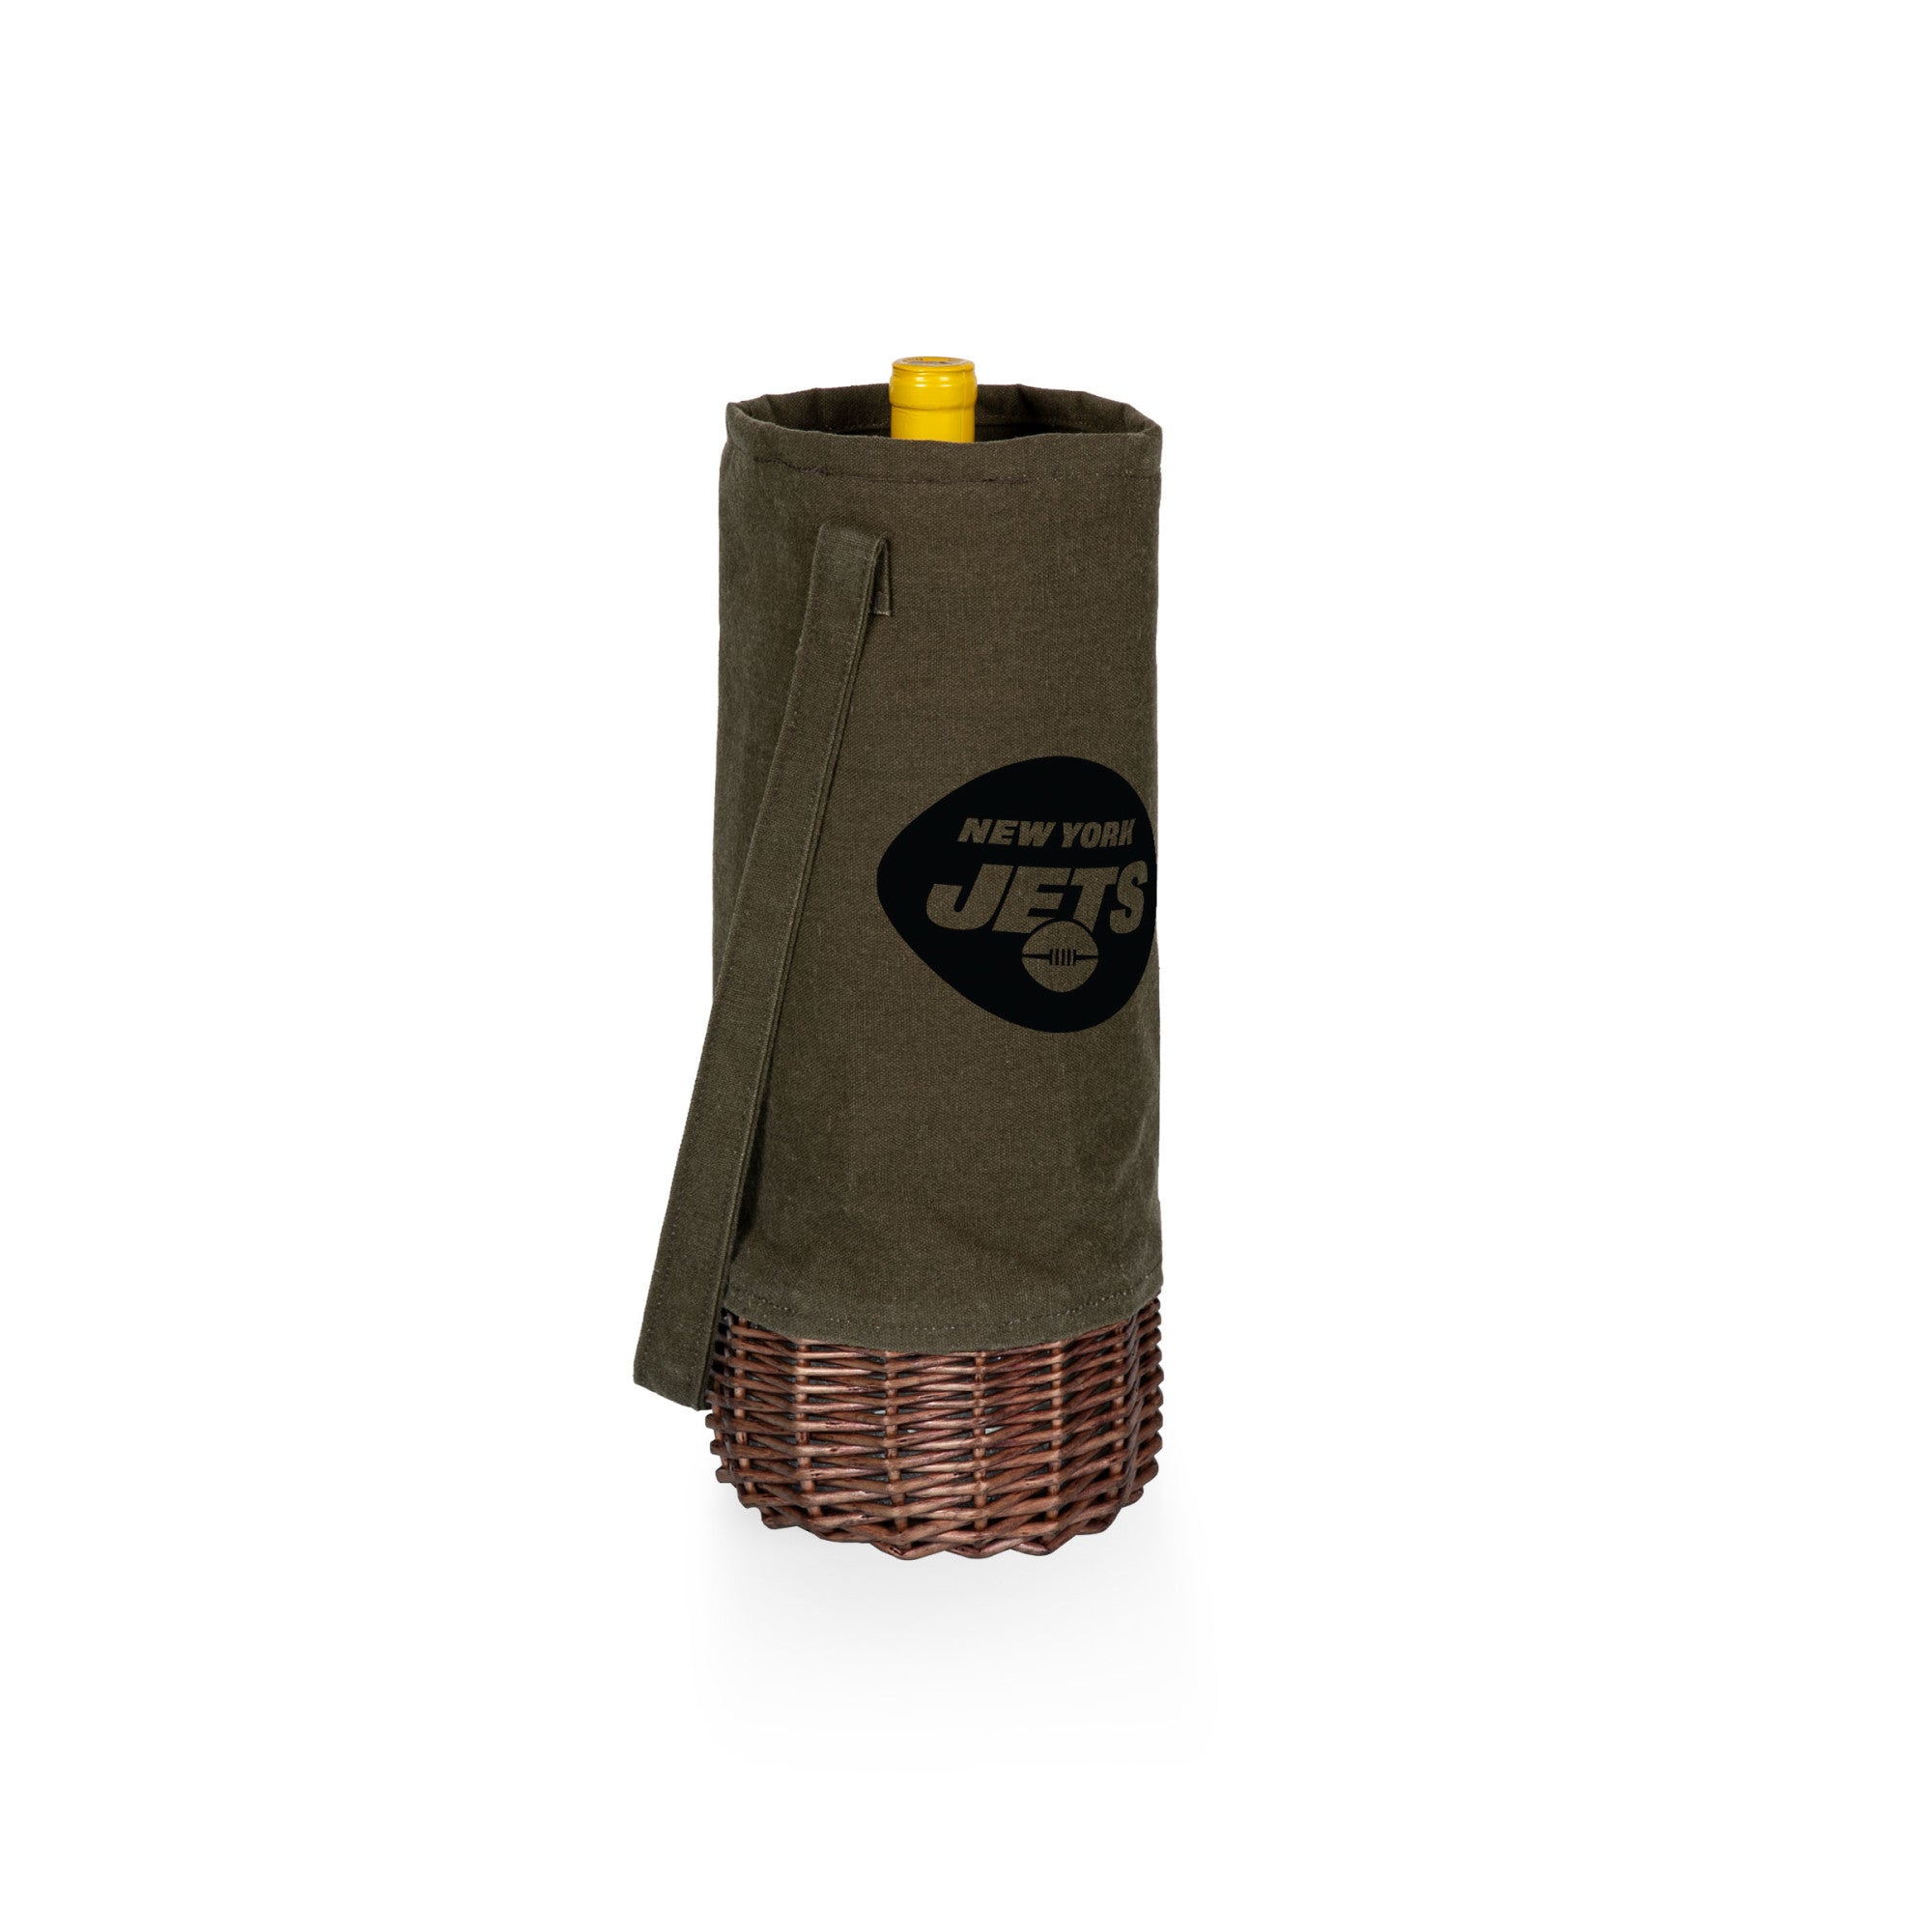 New York Jets - Malbec Insulated Canvas and Willow Wine Bottle Basket